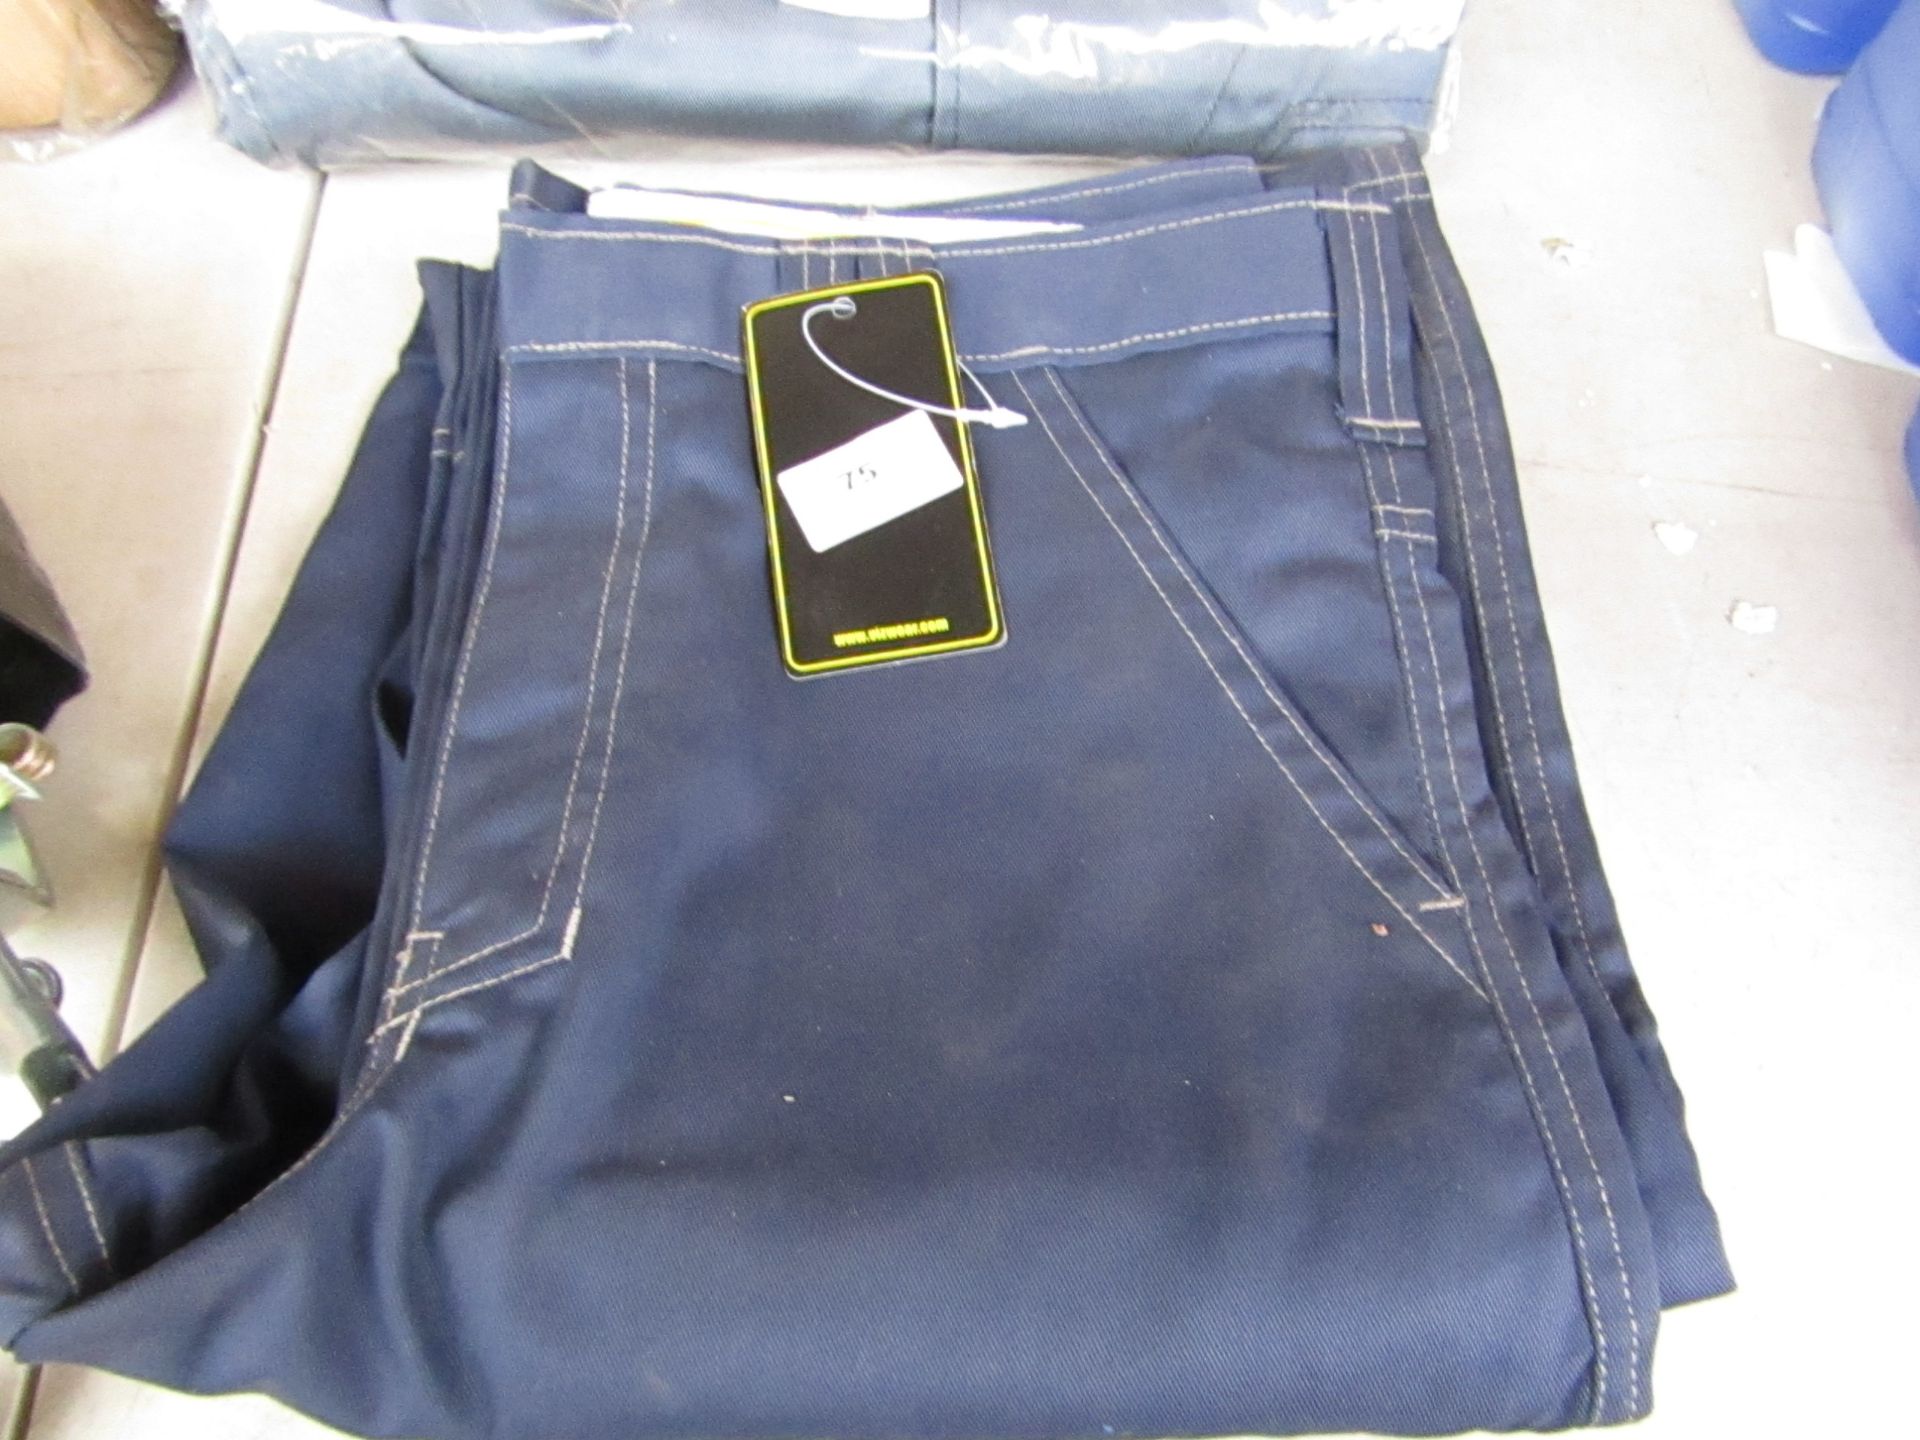 Vizwear action line trouser, size 28R, new and packaged.